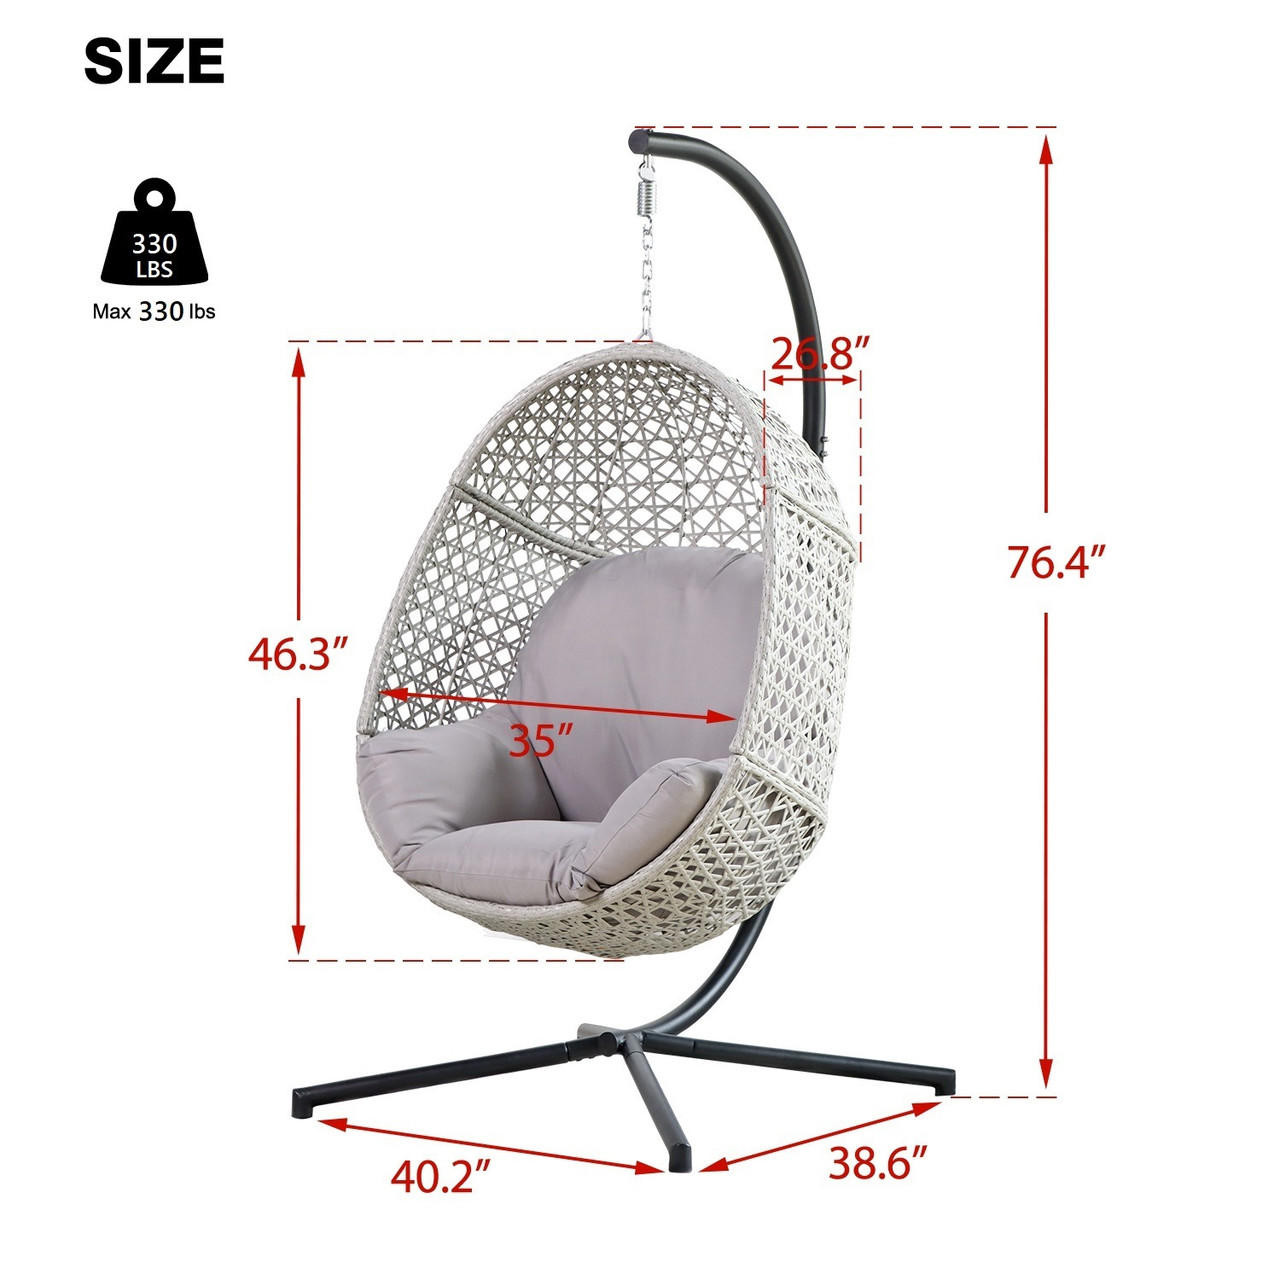 Chicken Pieces Large Hanging Egg Chair with Metal Stand and All in One Cushion - Grey 